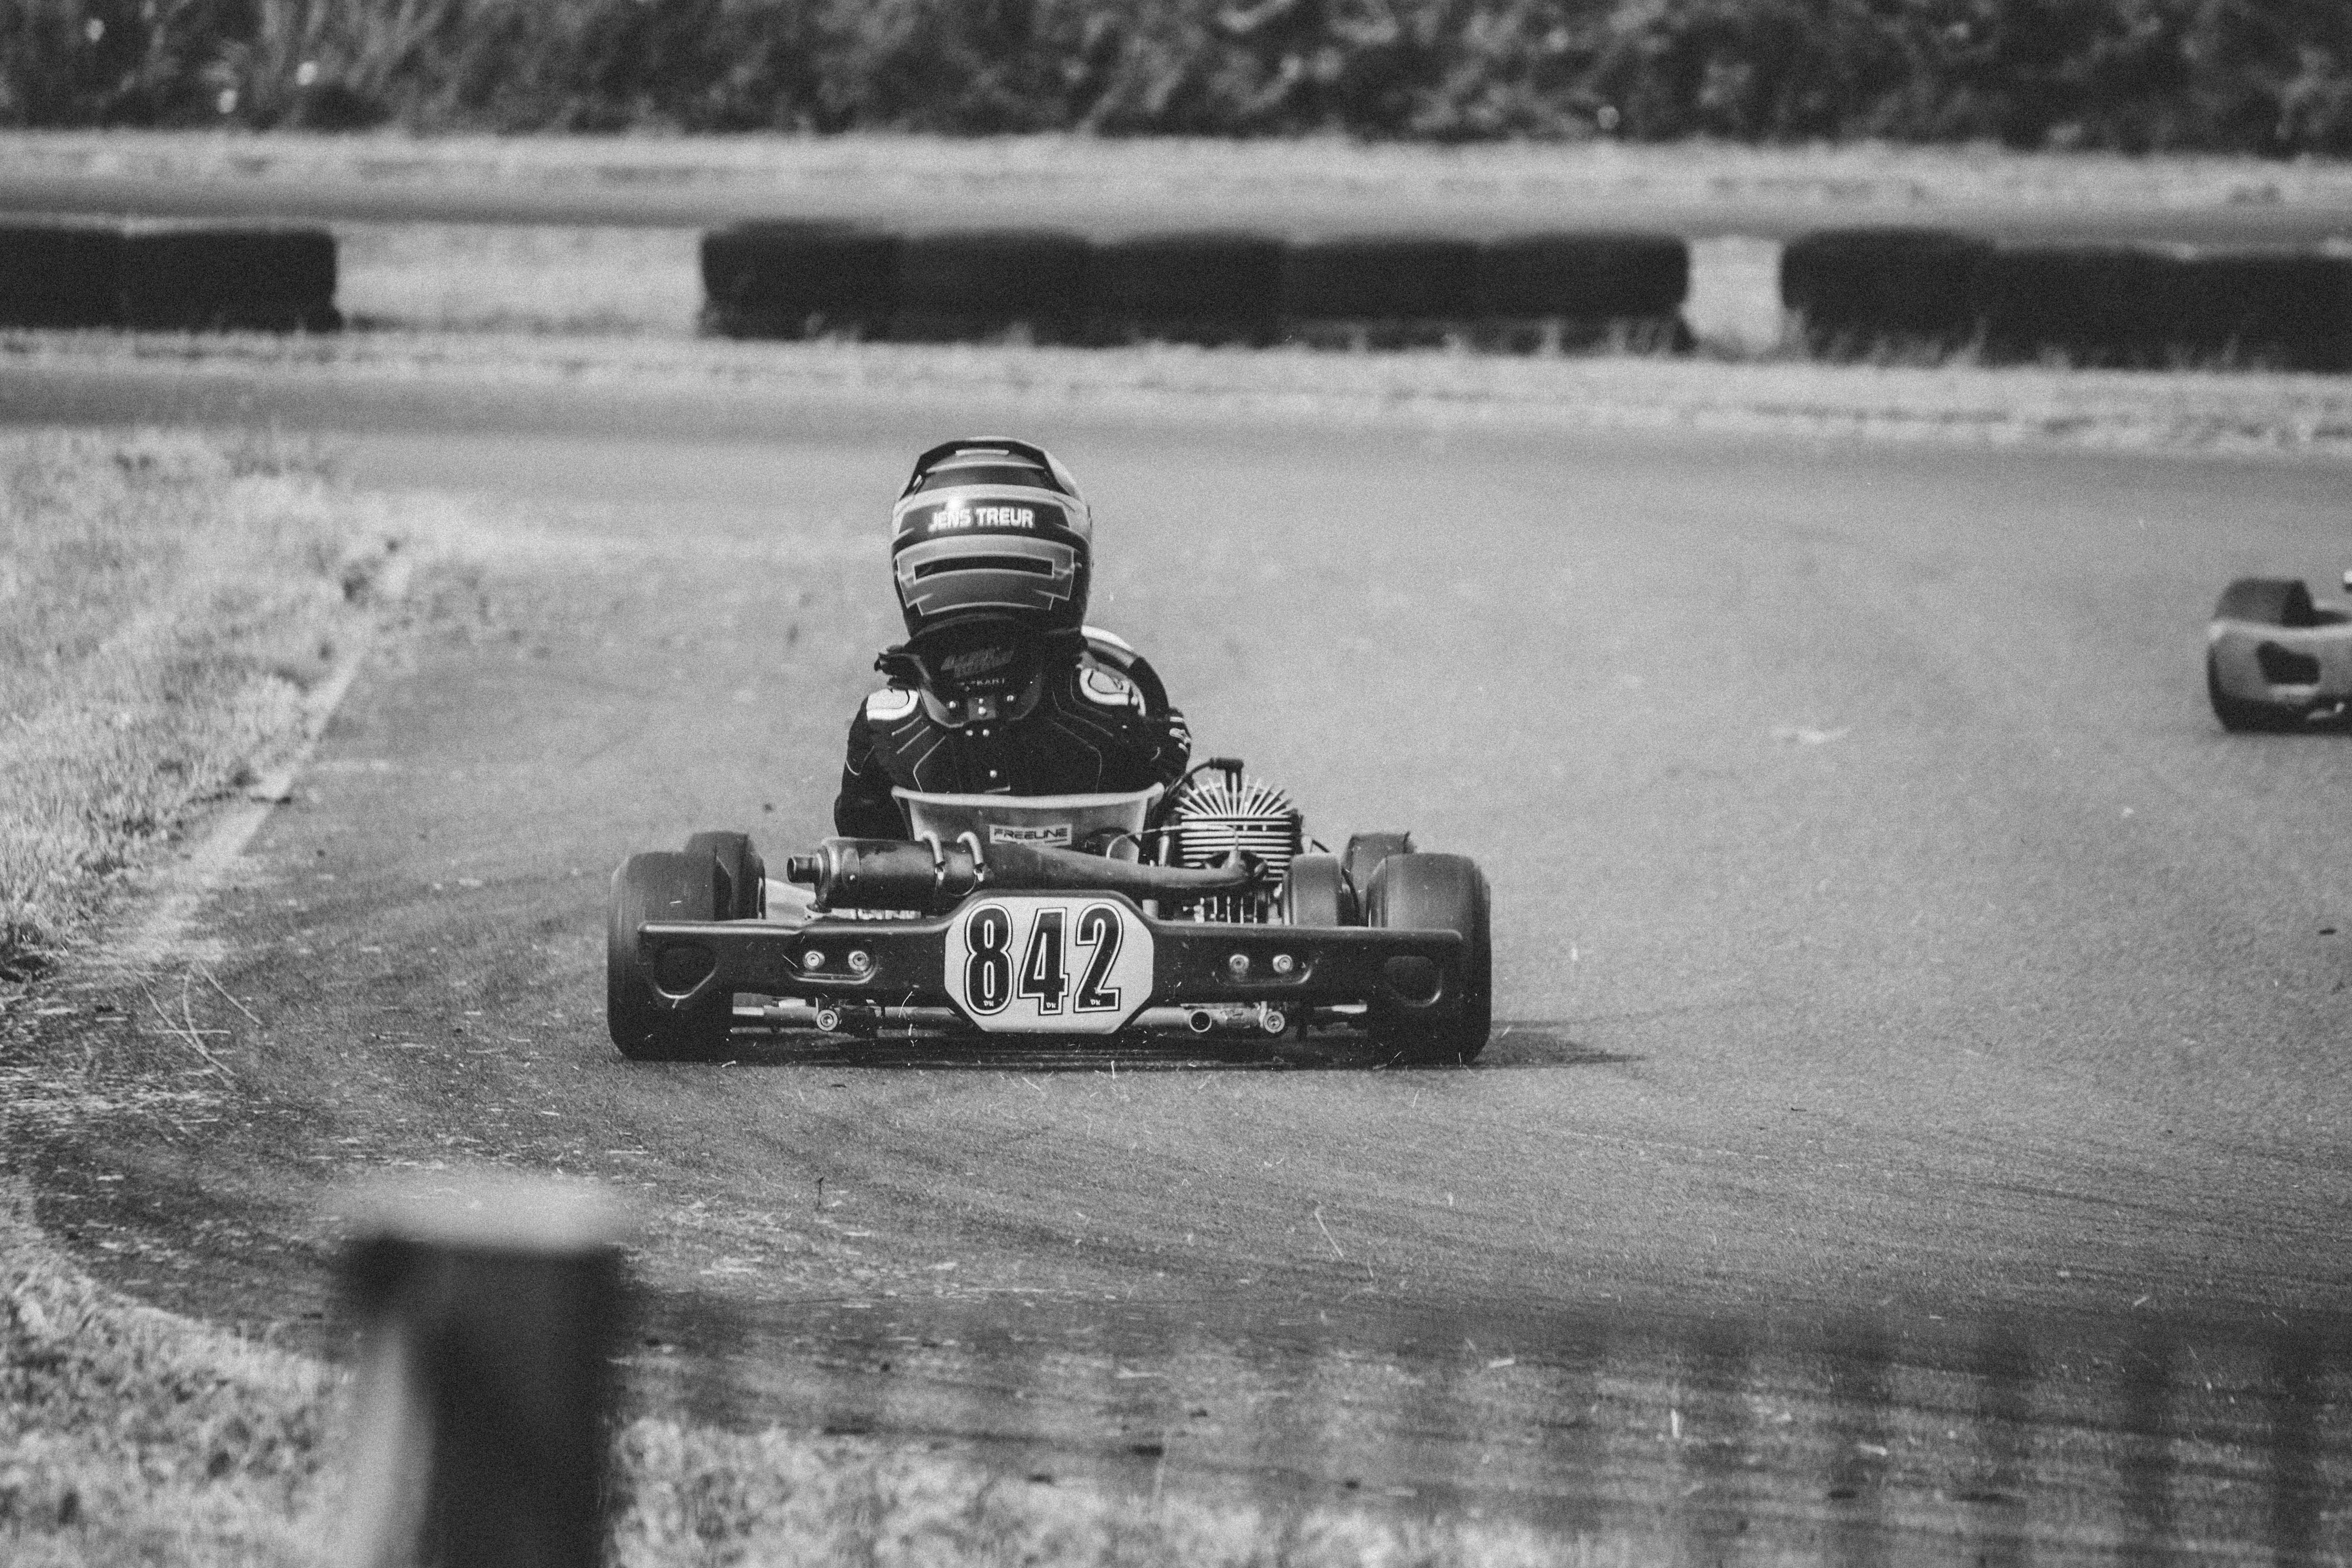 My little friend pushing his go-kart to the limit for qualifying. This is such an awesome thing to see.